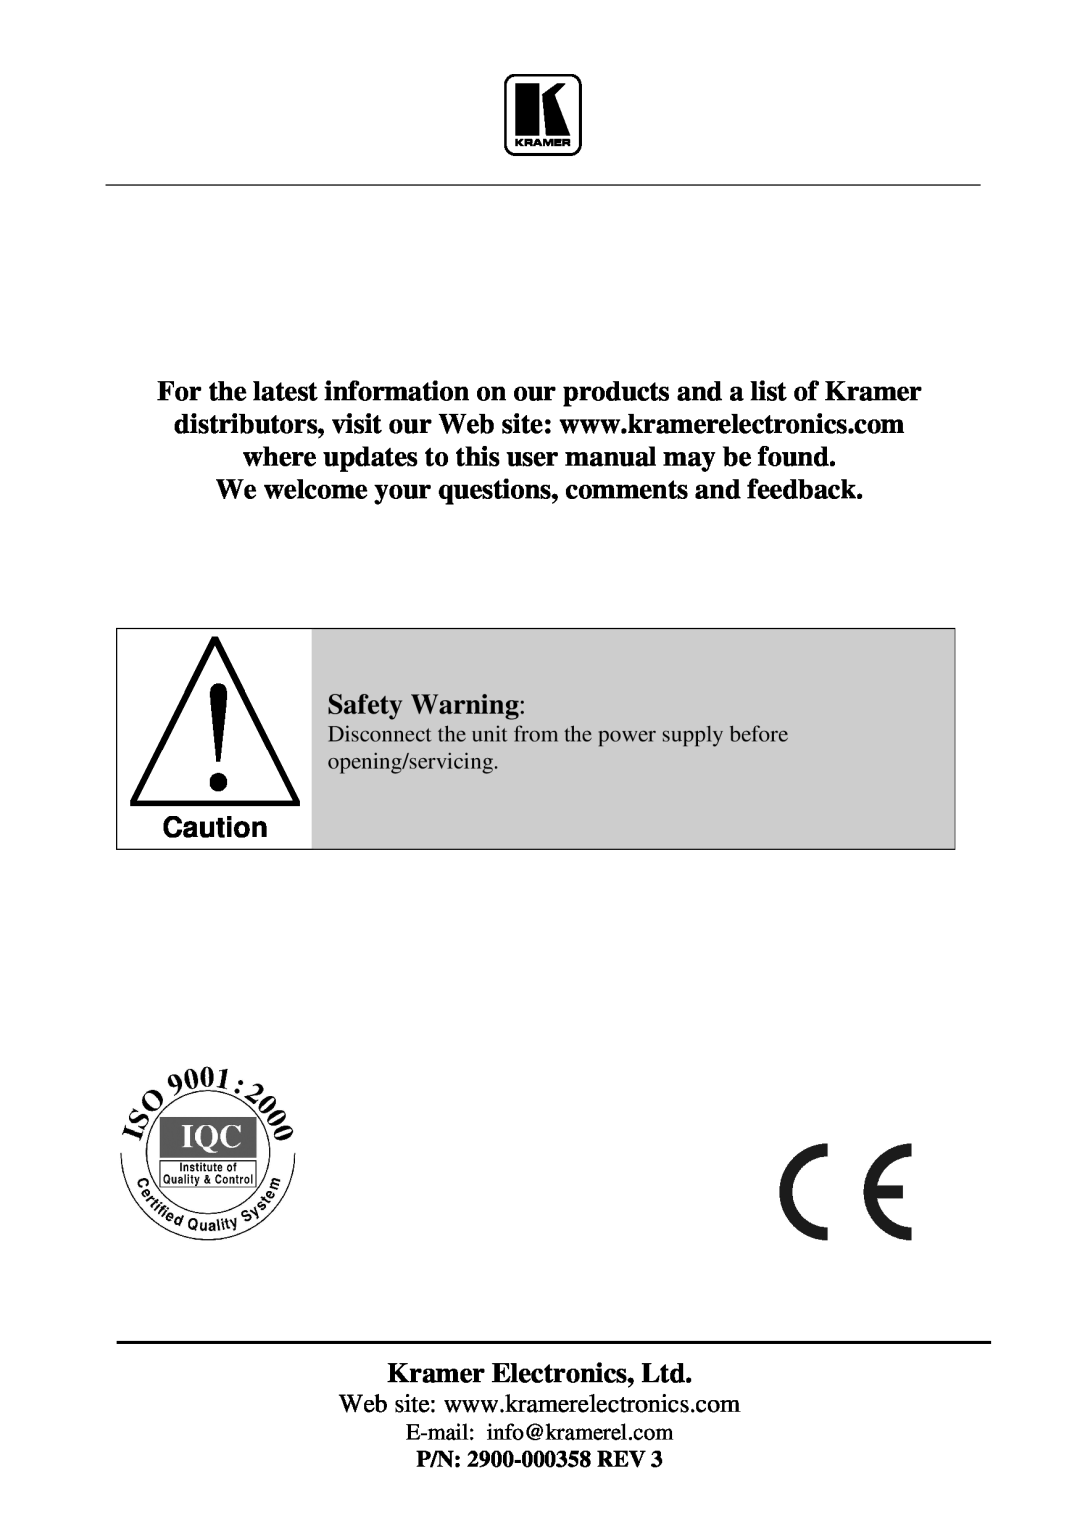 Kramer Electronics FC-8 user manual We welcome your questions, comments and feedback Safety Warning, P/N 2900-000358 REV 